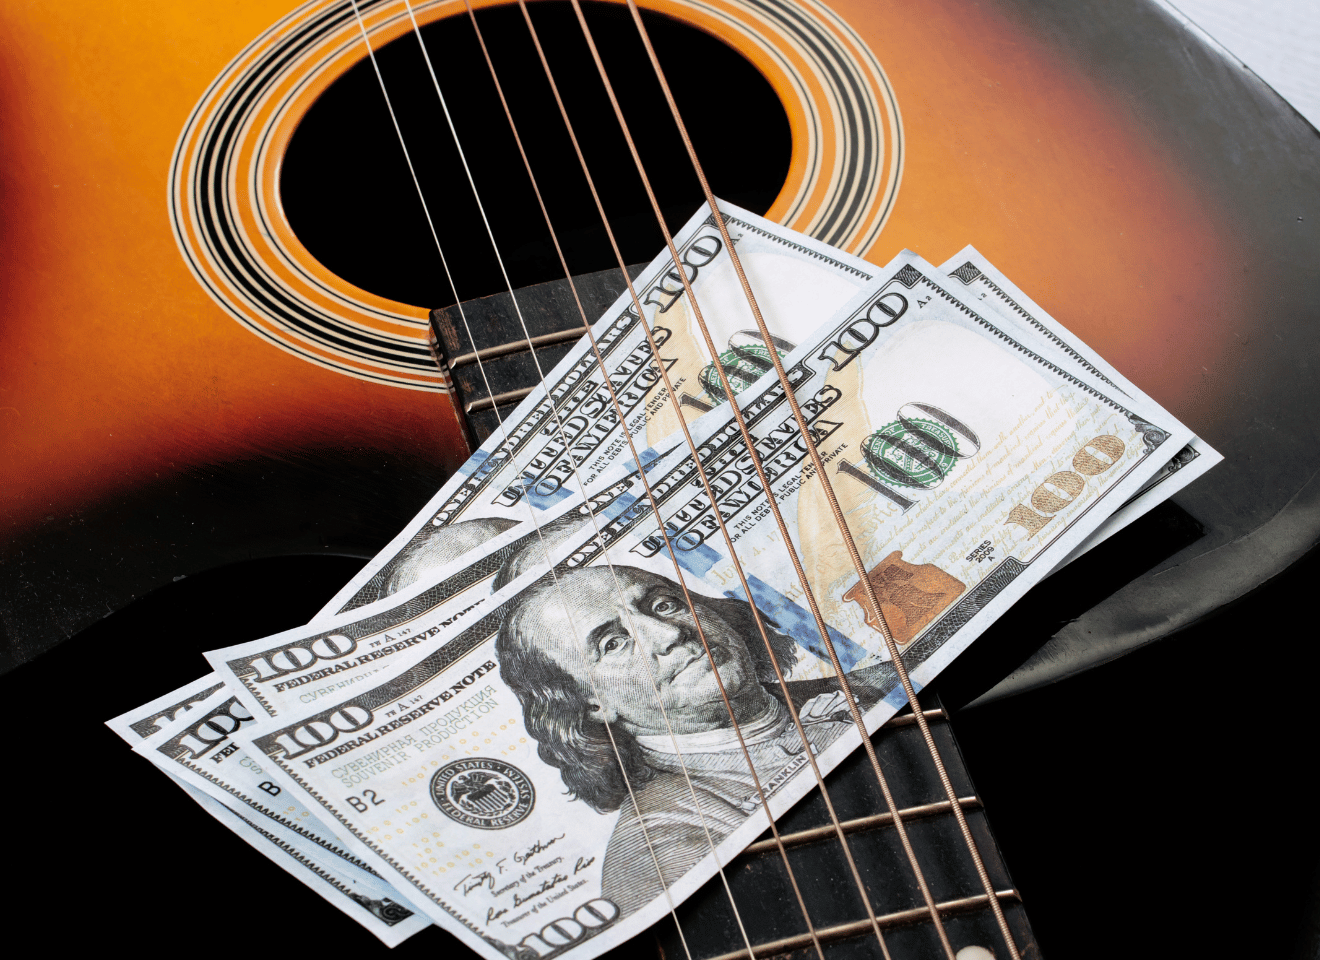 17 Best Acoustic Guitars Under $2000 That Are Worth Checking Out